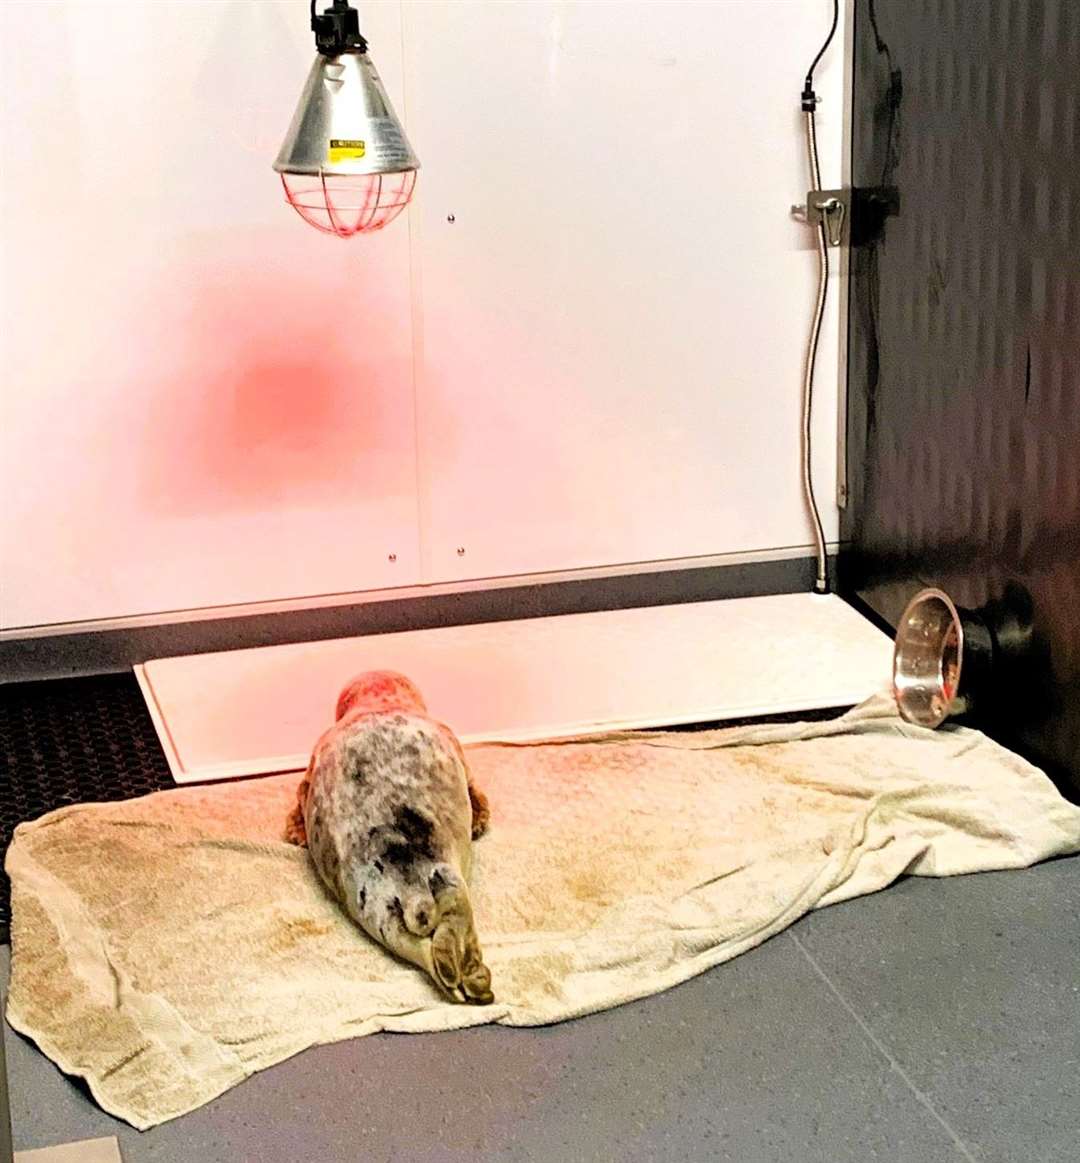 Jan the seal under a special heat lamp at the seal rehab centre. Pictures: CSRR